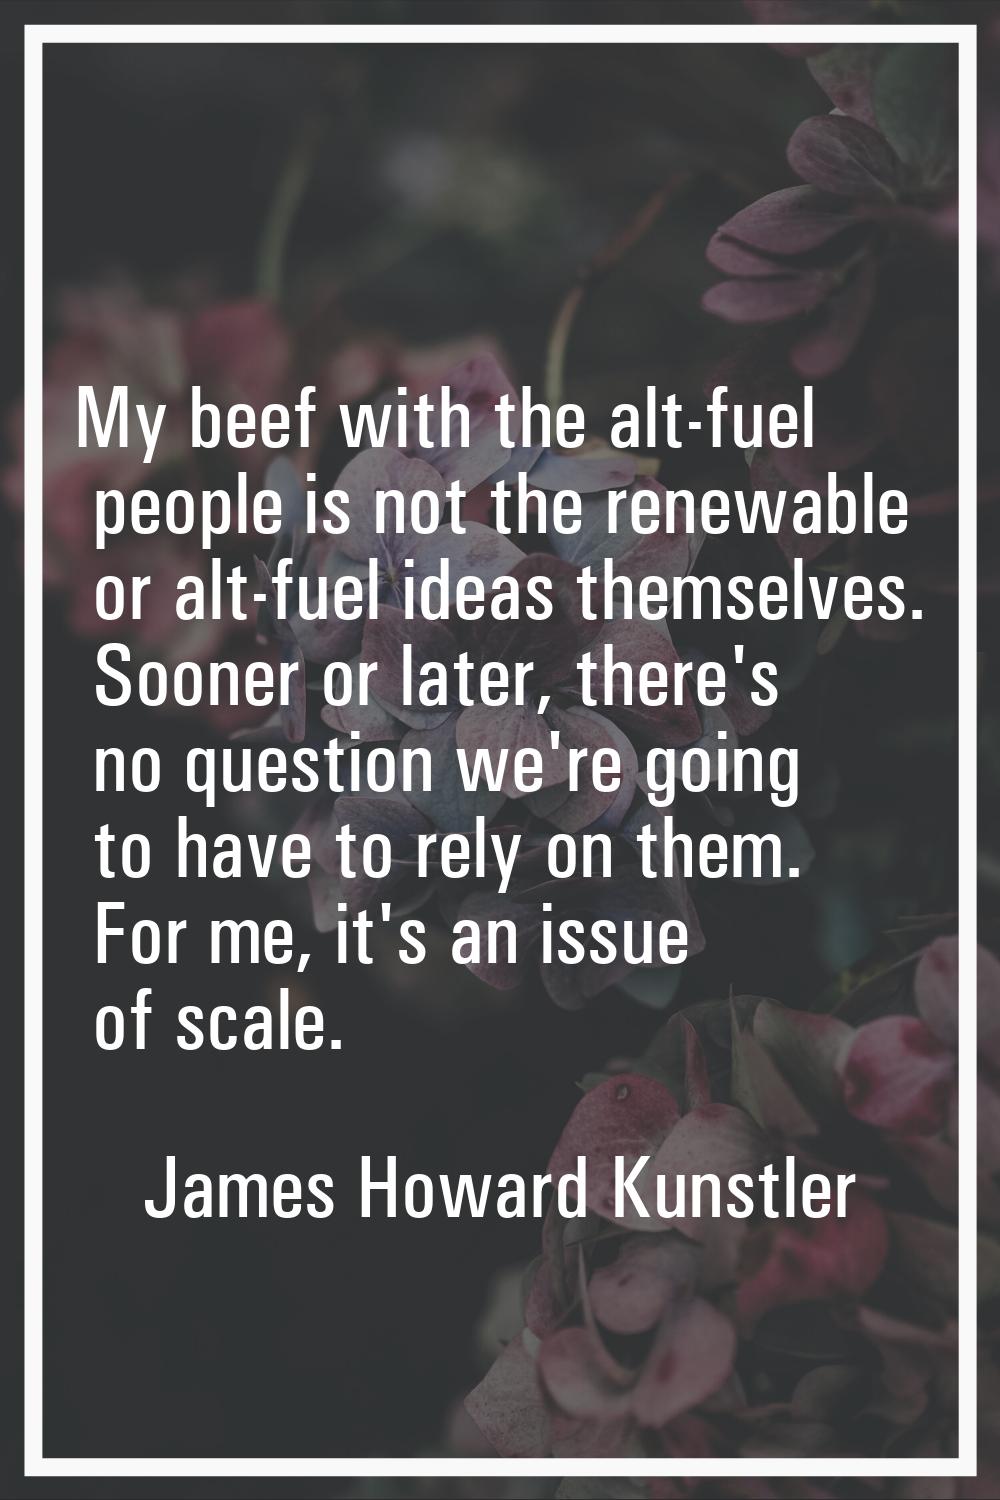 My beef with the alt-fuel people is not the renewable or alt-fuel ideas themselves. Sooner or later